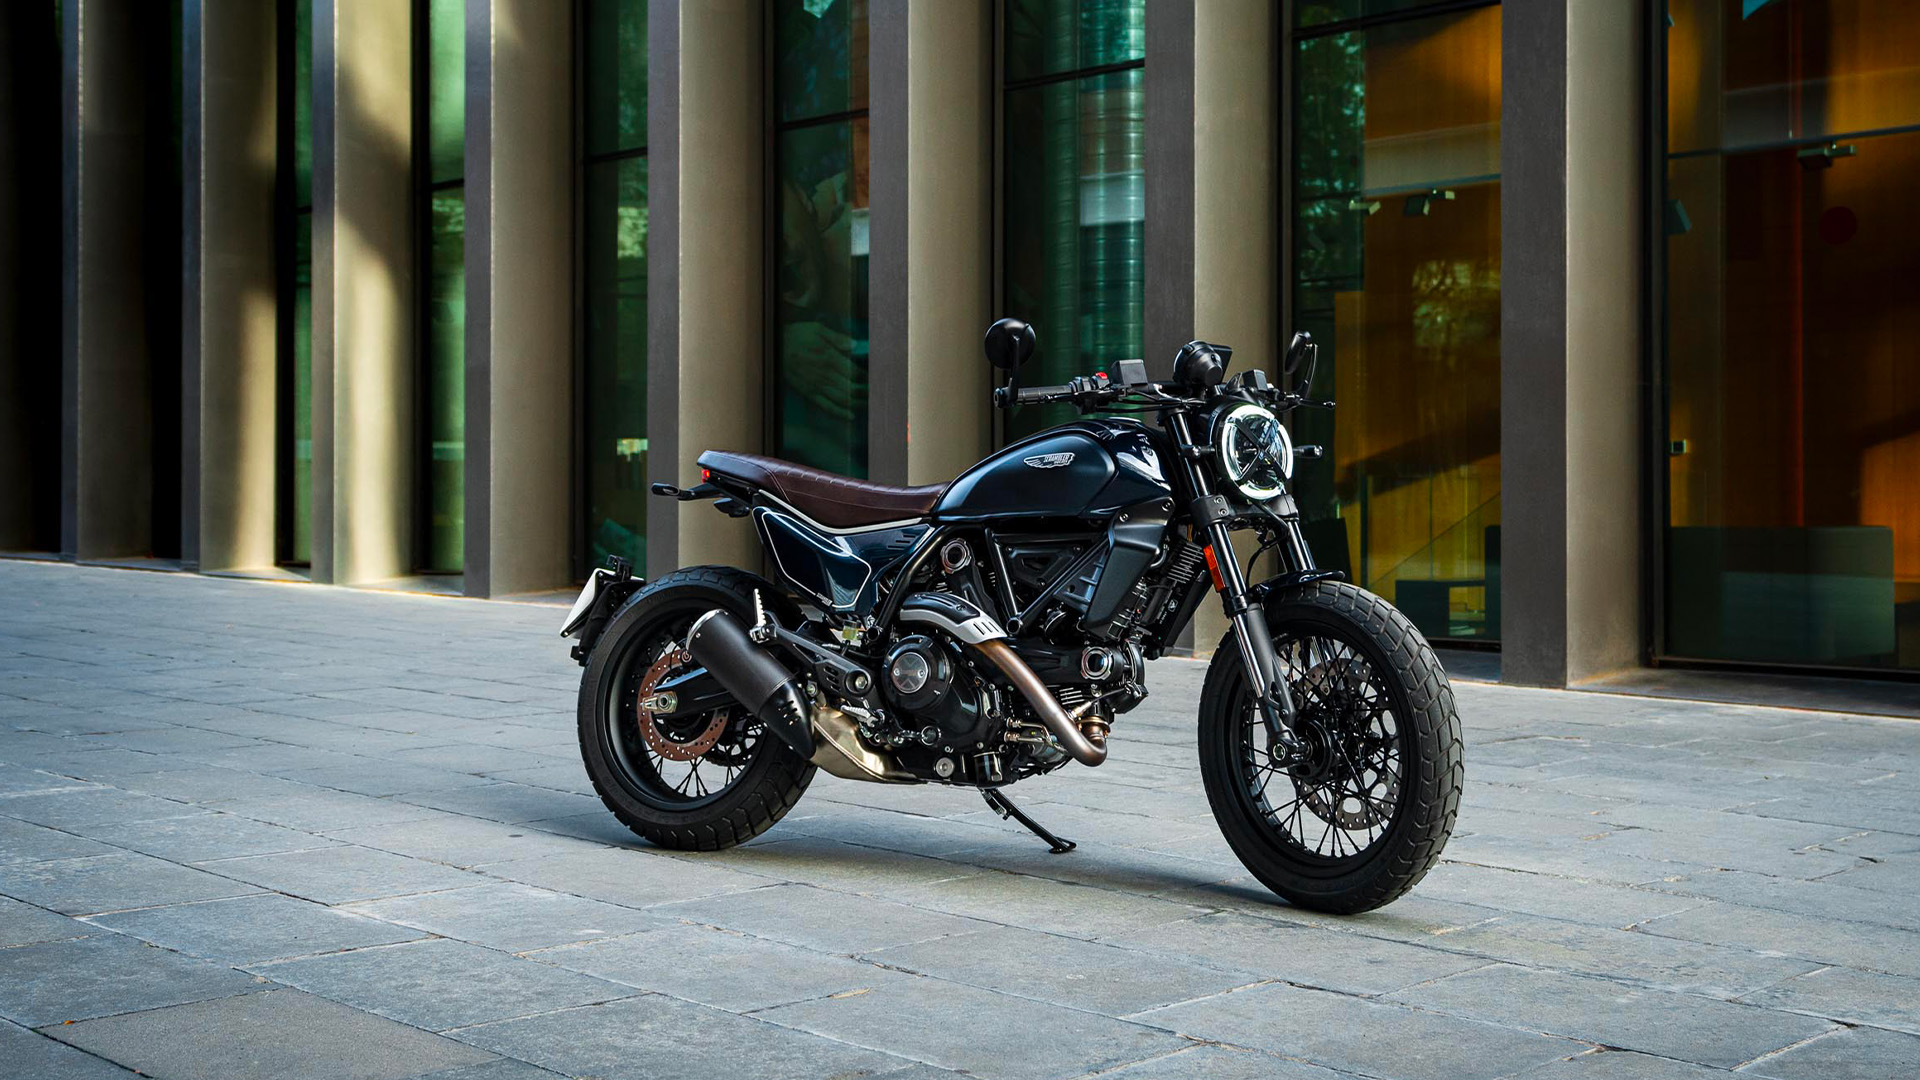 Ducati Scrambler Deliveries Cross 1 Lakh Units Throughout the World Since  2015  HT Auto